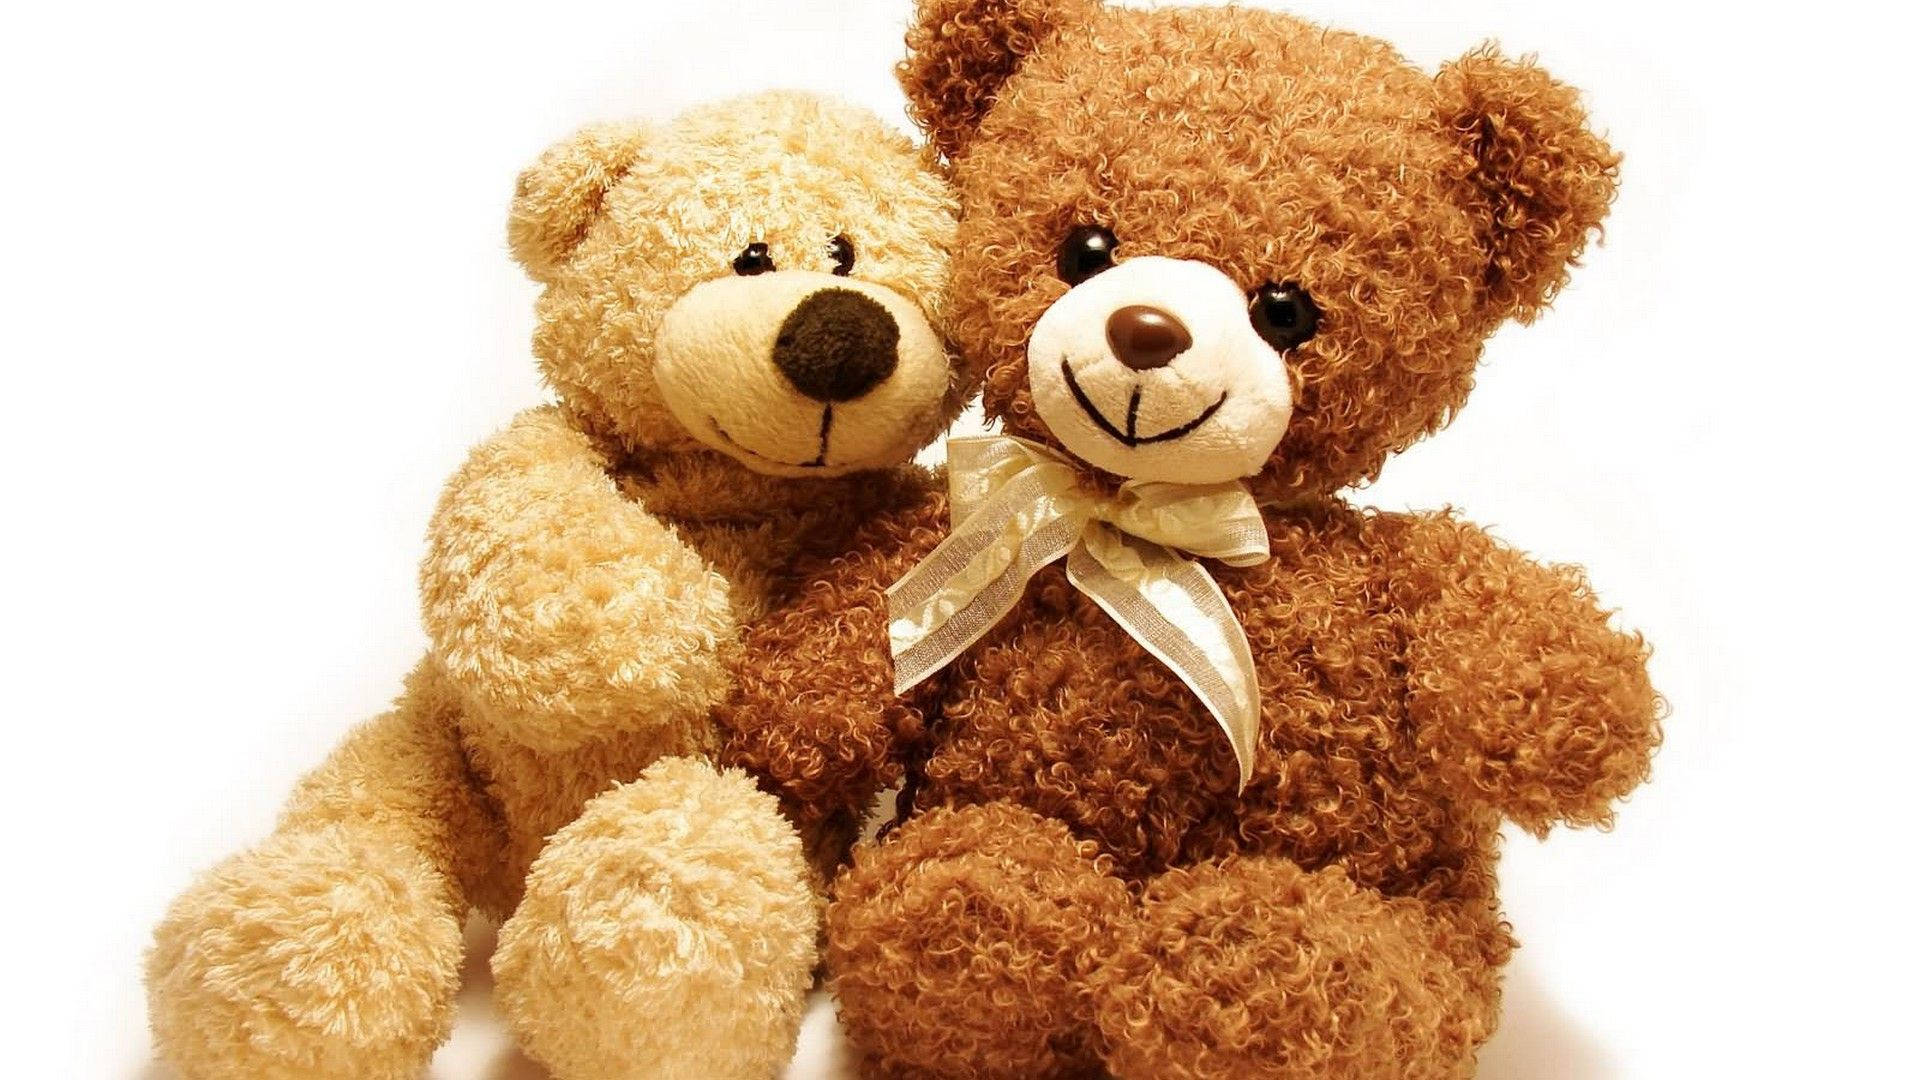 Creamy And Brown Teddy Bear Background